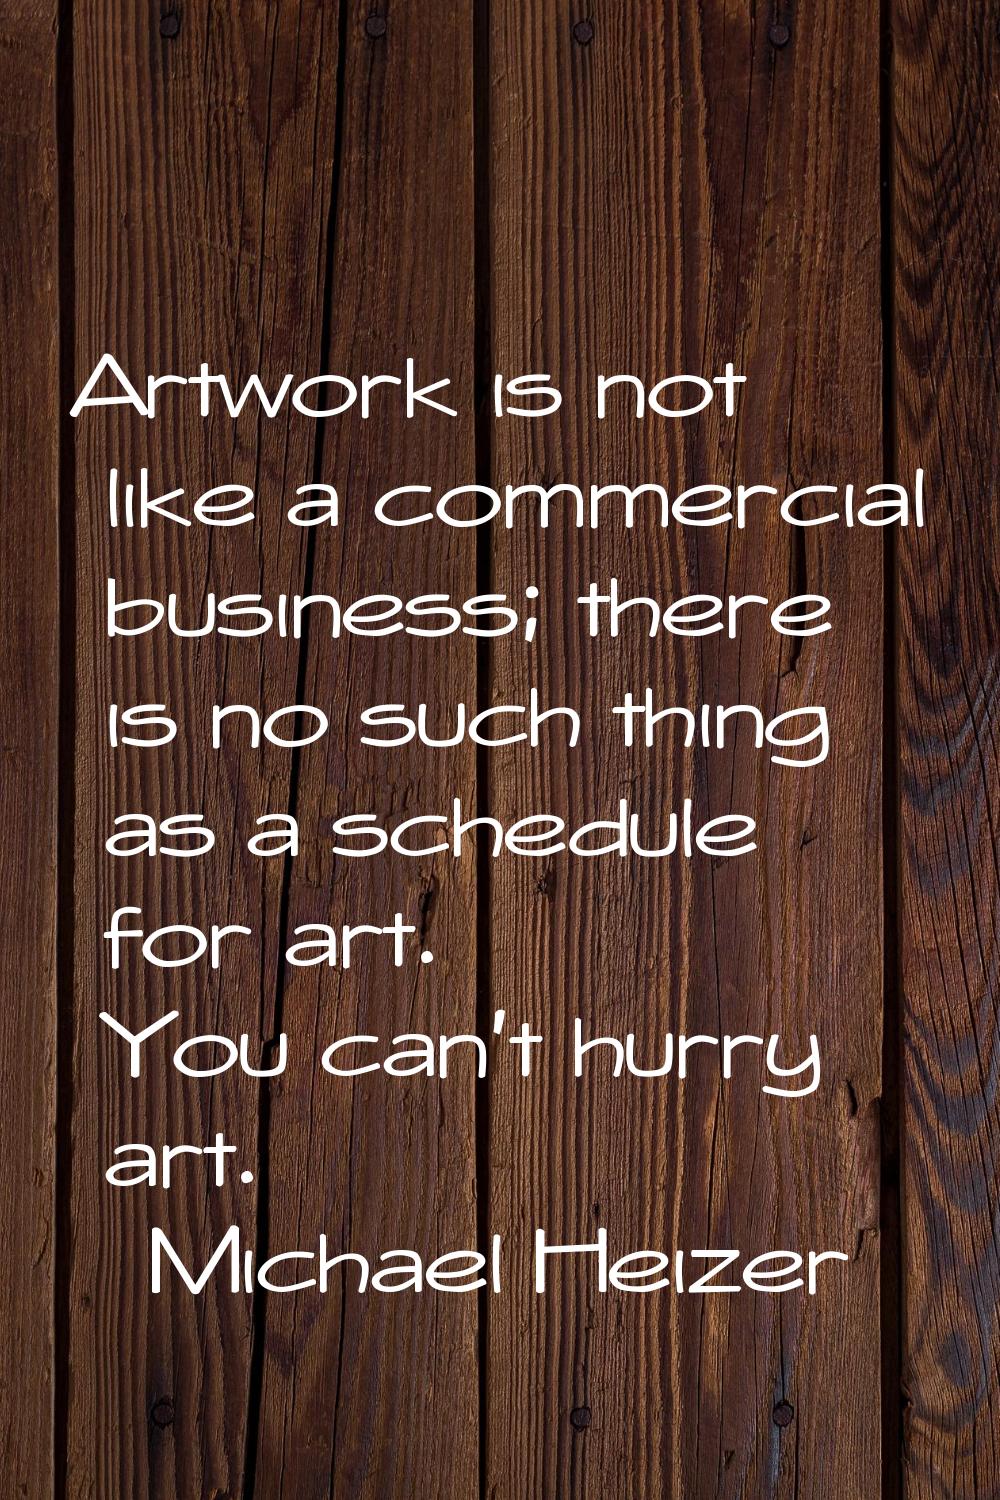 Artwork is not like a commercial business; there is no such thing as a schedule for art. You can't 